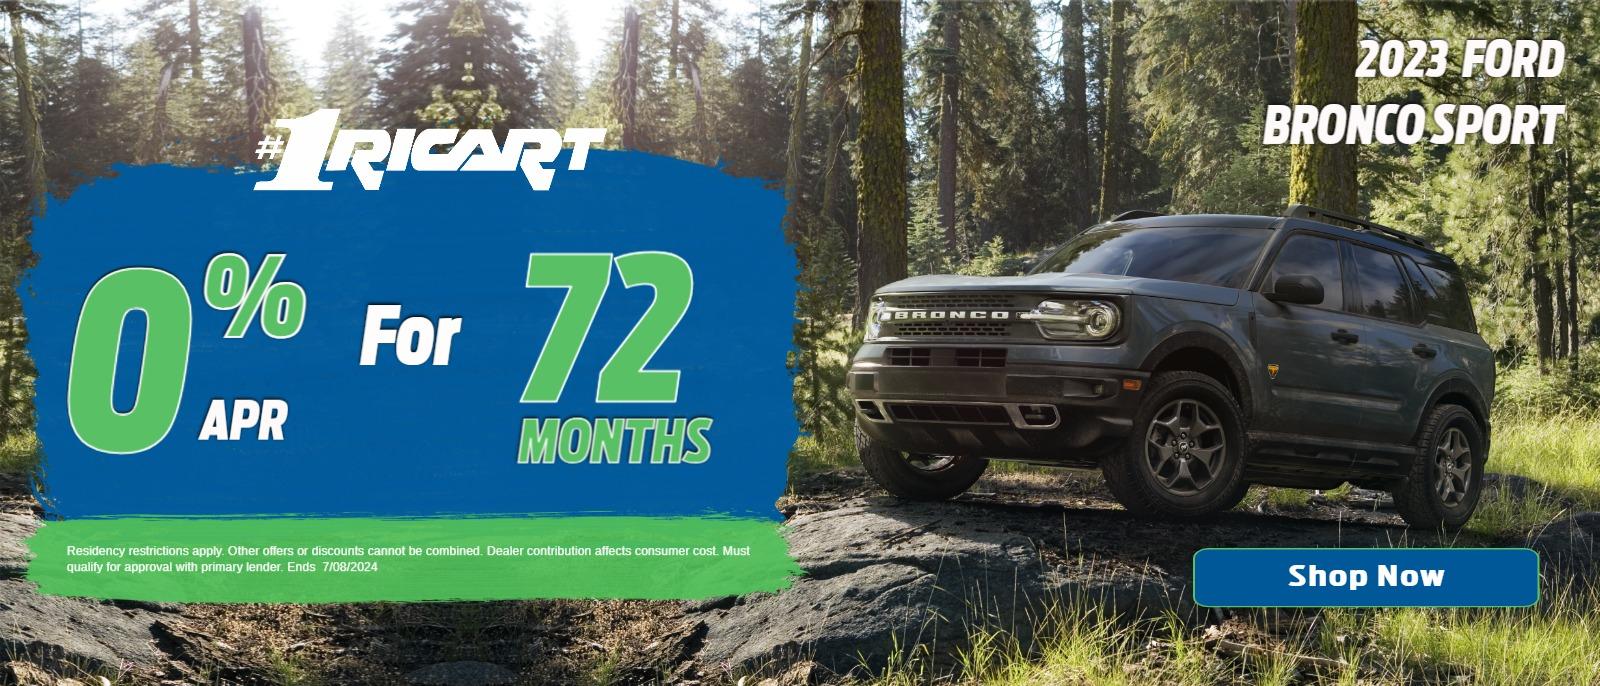 2023 Ford Bronco Sport - 0% APR For 72 Months